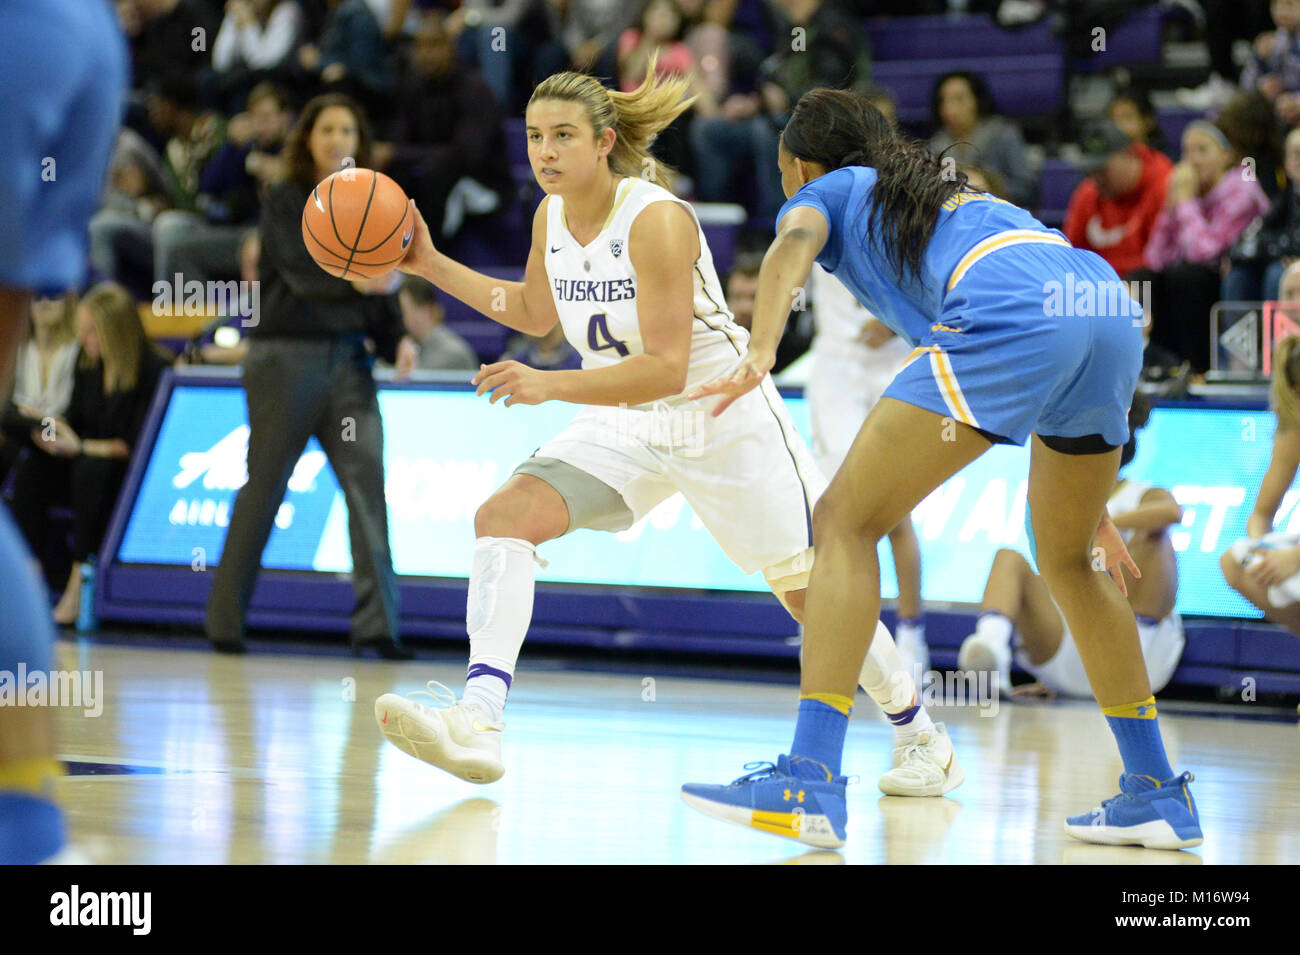 Seattle, WA, USA. 26th Jan, 2018. UW guard Amber Melgoza (4) works against Jordin Canada (3) of UCLA during a PAC12 womens basketball game between the Washington Huskies and UCLA Bruins. The game was played at Hec Ed Pavilion in Seattle, WA. Jeff Halstead/CSM/Alamy Live News Stock Photo